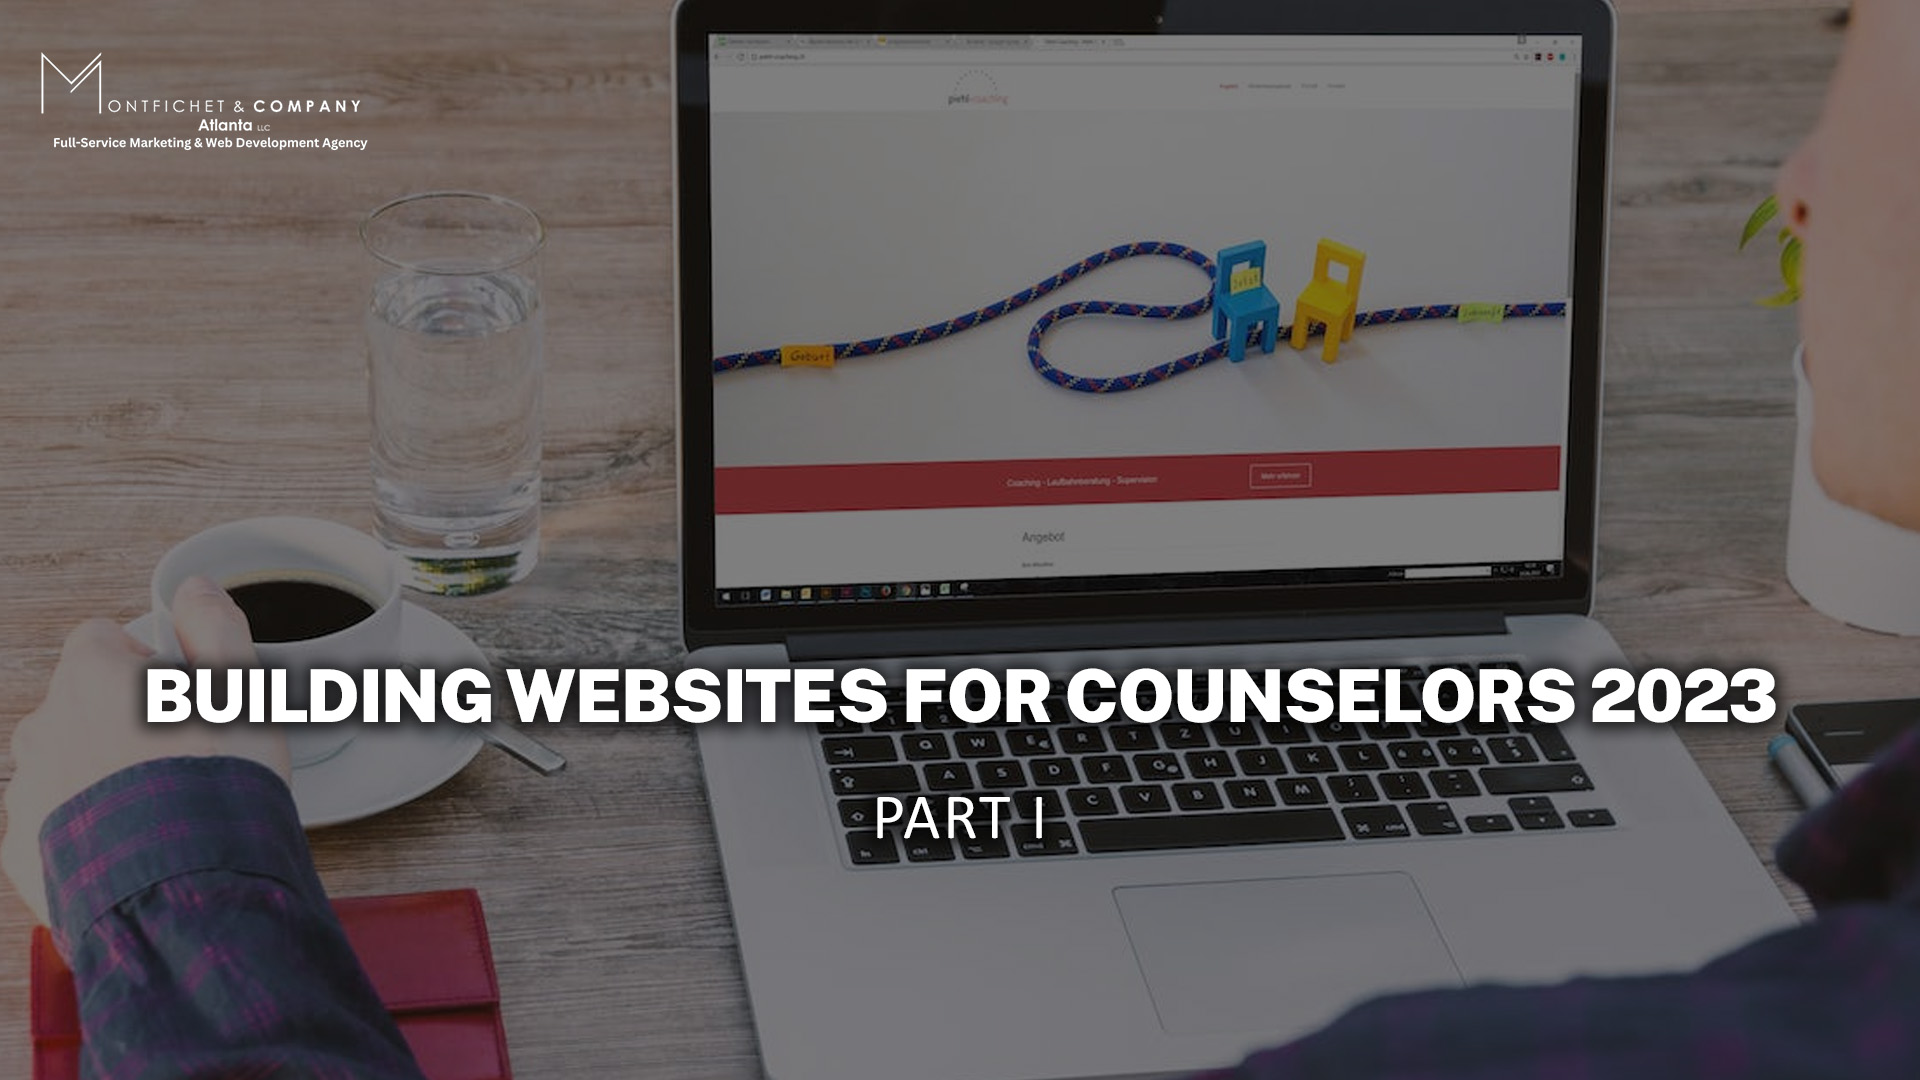 BUILDING WEBSITES FOR COUNSELORS 2023 PART I